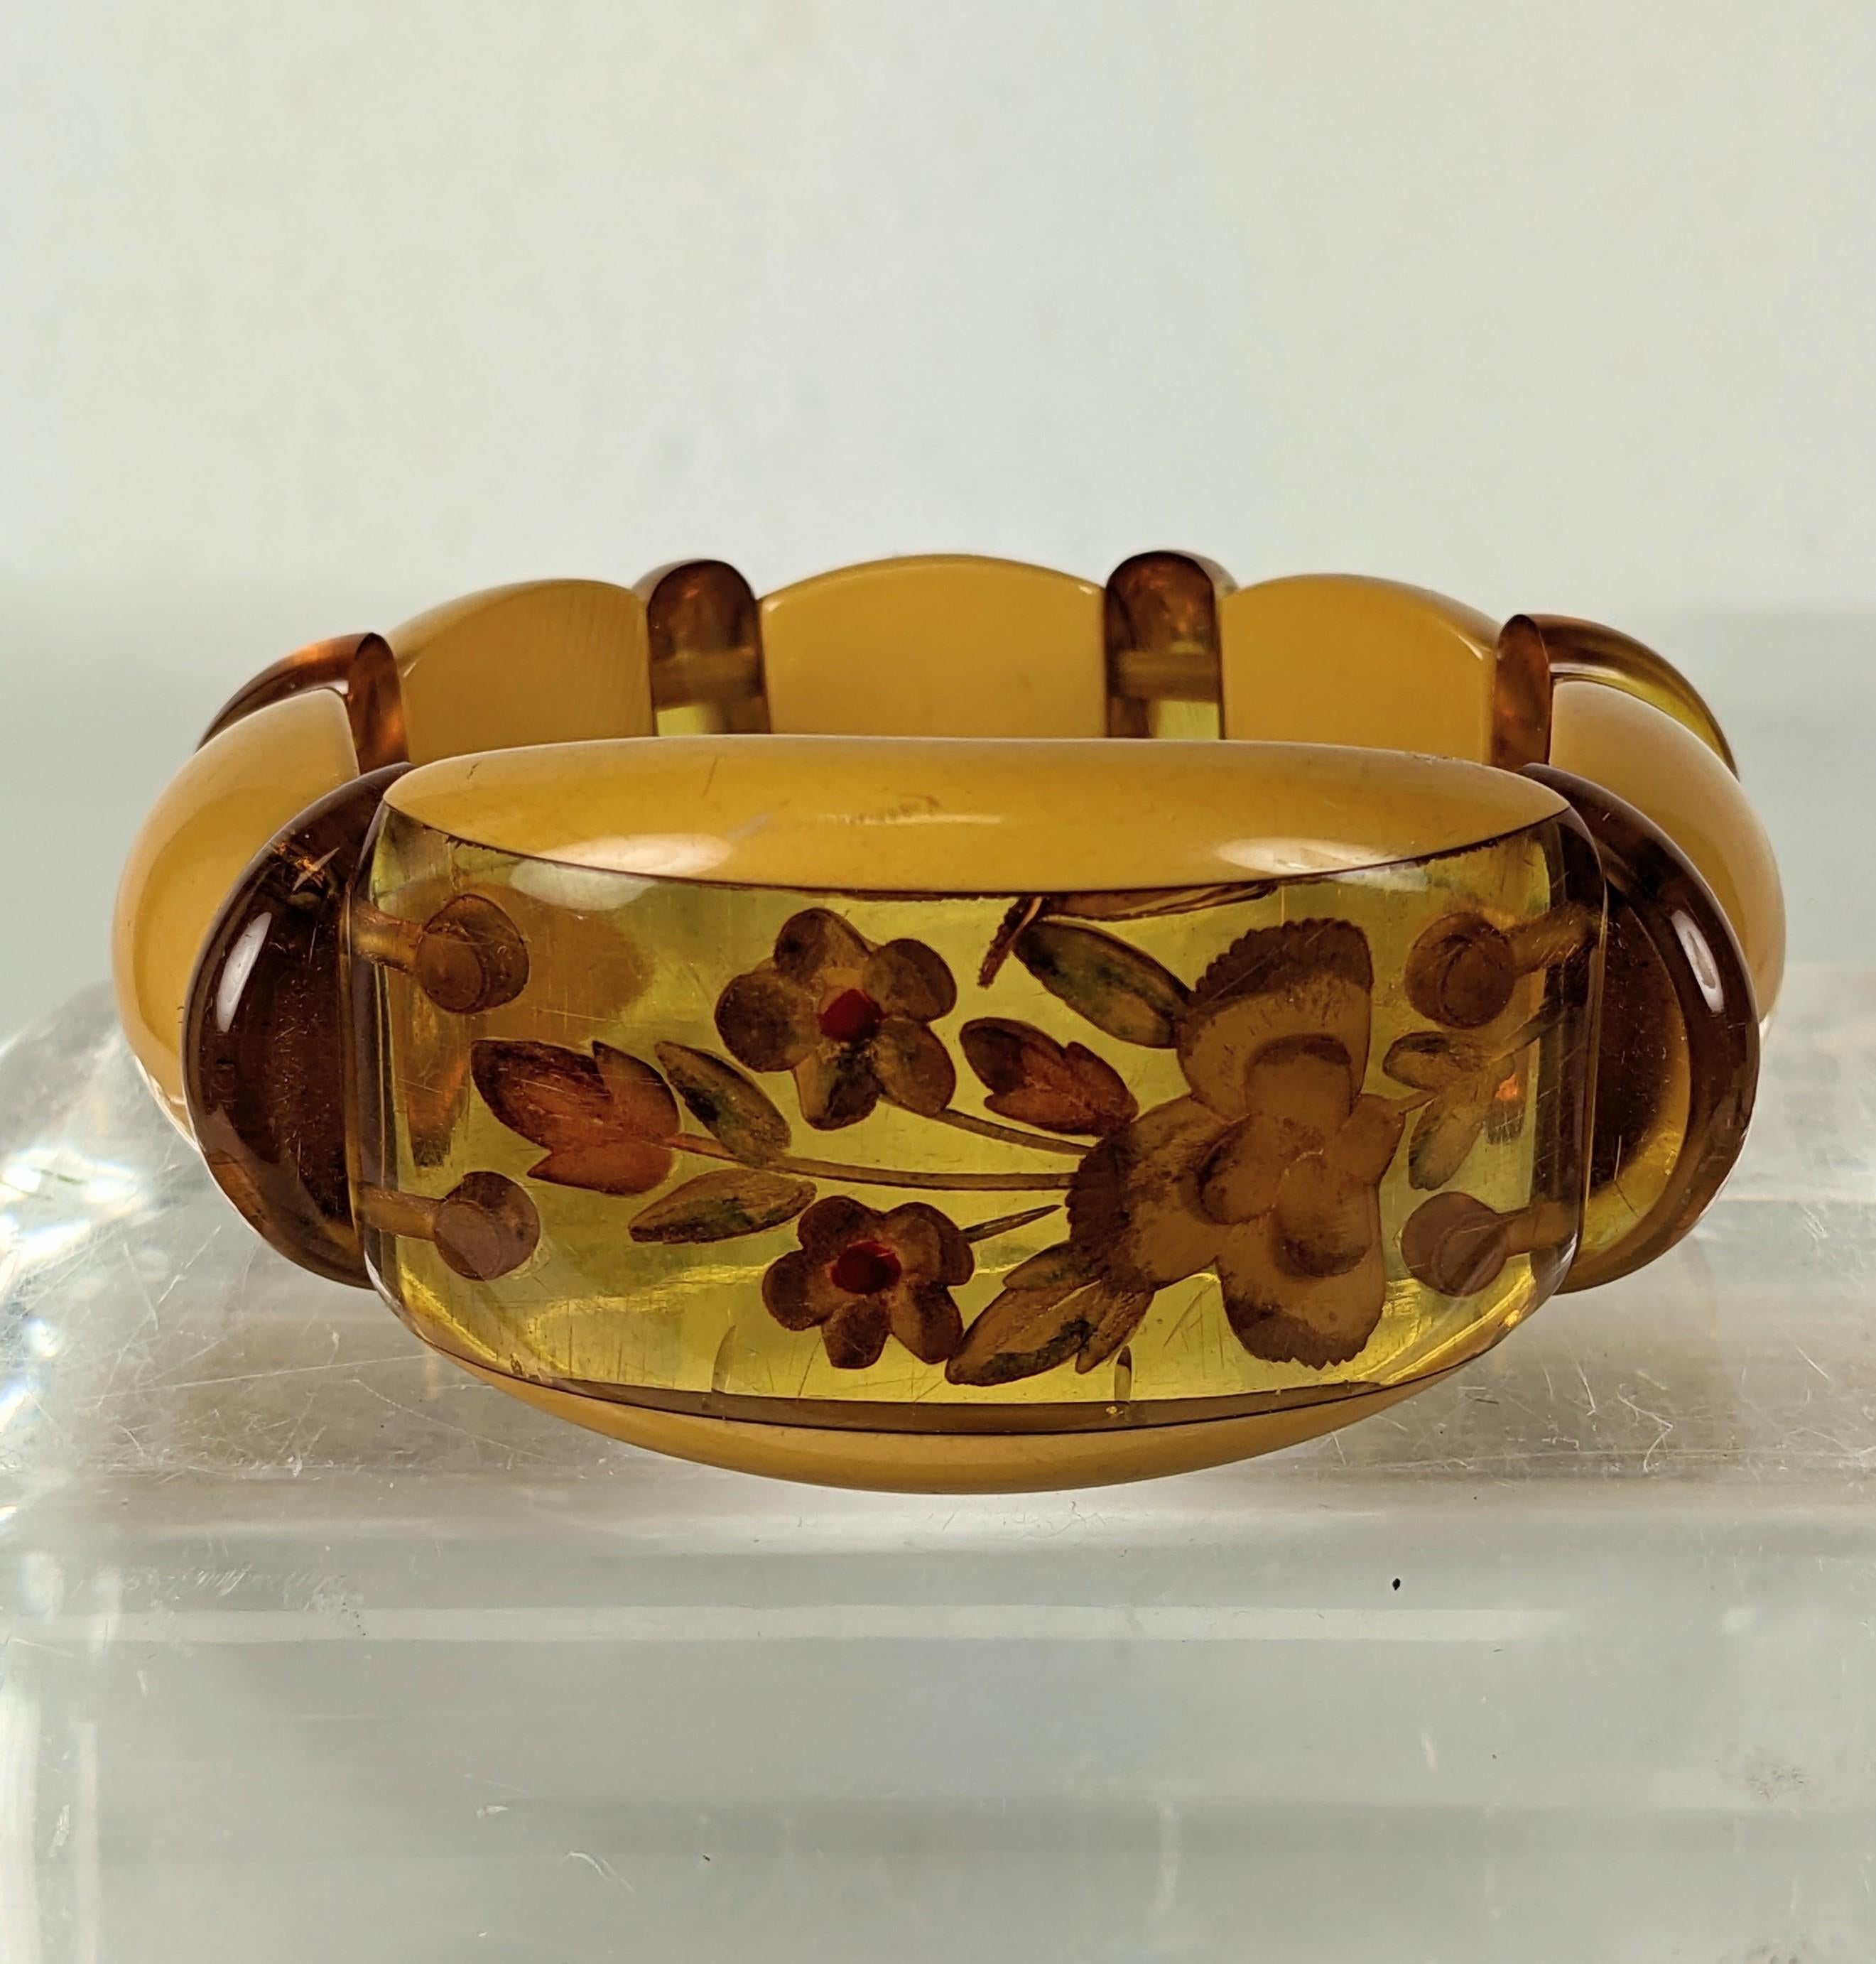 Reverse Carved Bakelite Stretch Bracelet from the Art Deco Period. Central reverse carved motif with apple juice and mango bakelite links on elastic string. Reverse carved and painted flowers on central panel. There are 3 stress cracks visible but